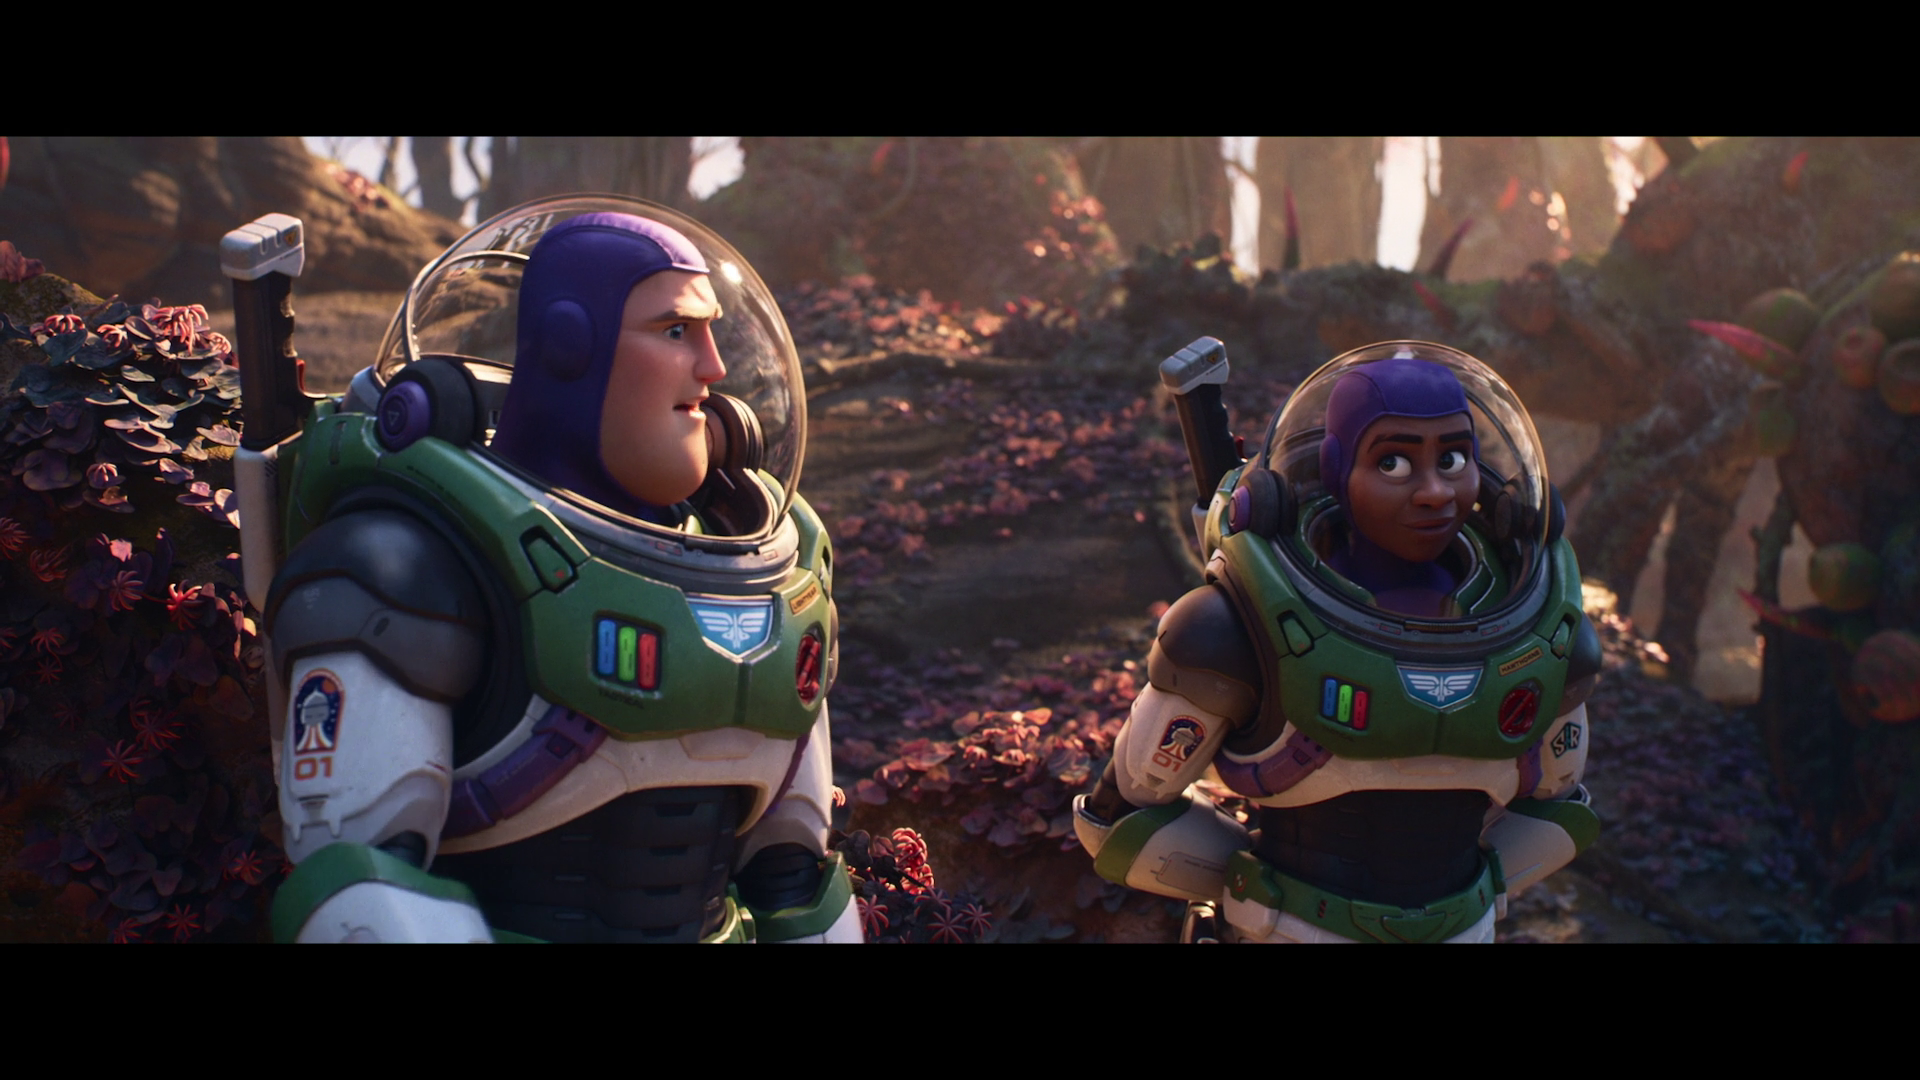 Review: Pixar's Lightyear squanders its sci-fi reboot potential